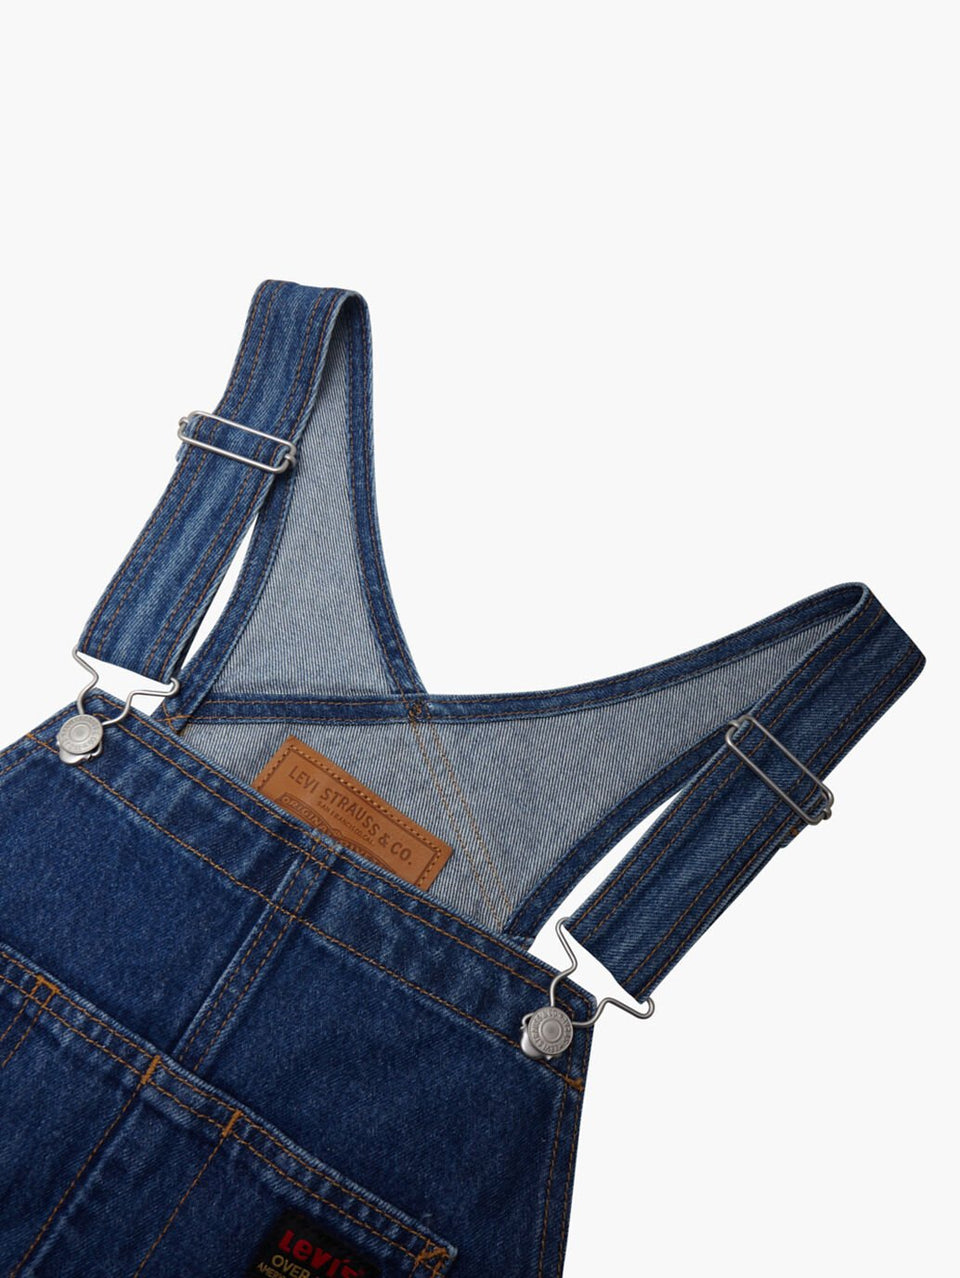 Levis Men's Red Tab Overalls Saturday Morning